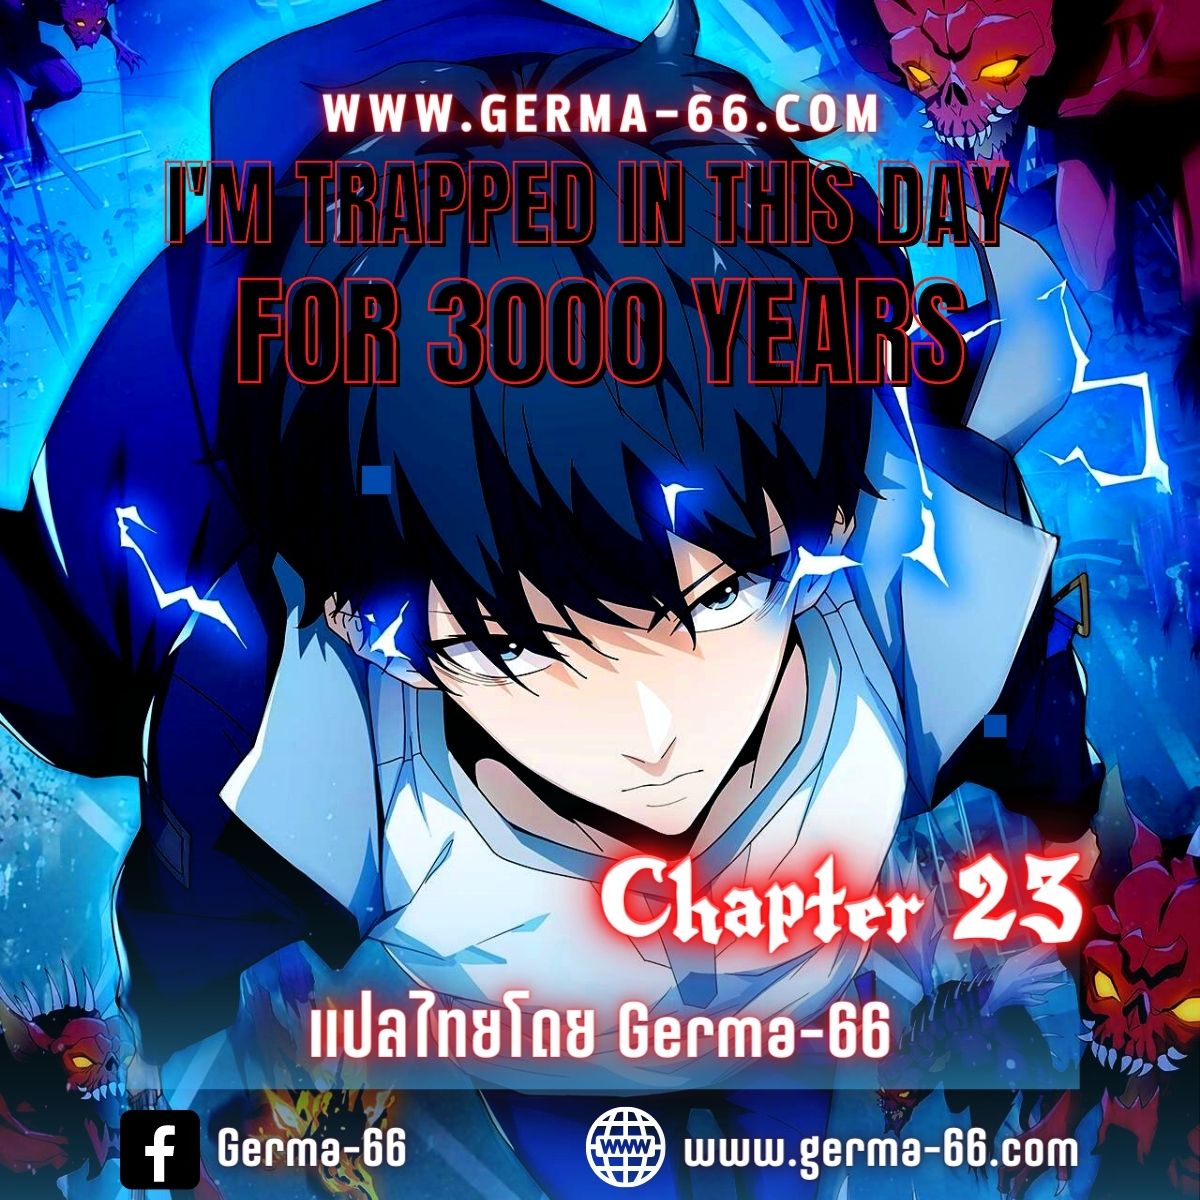 germa 66 trapped in this day for 3000 years 23.01